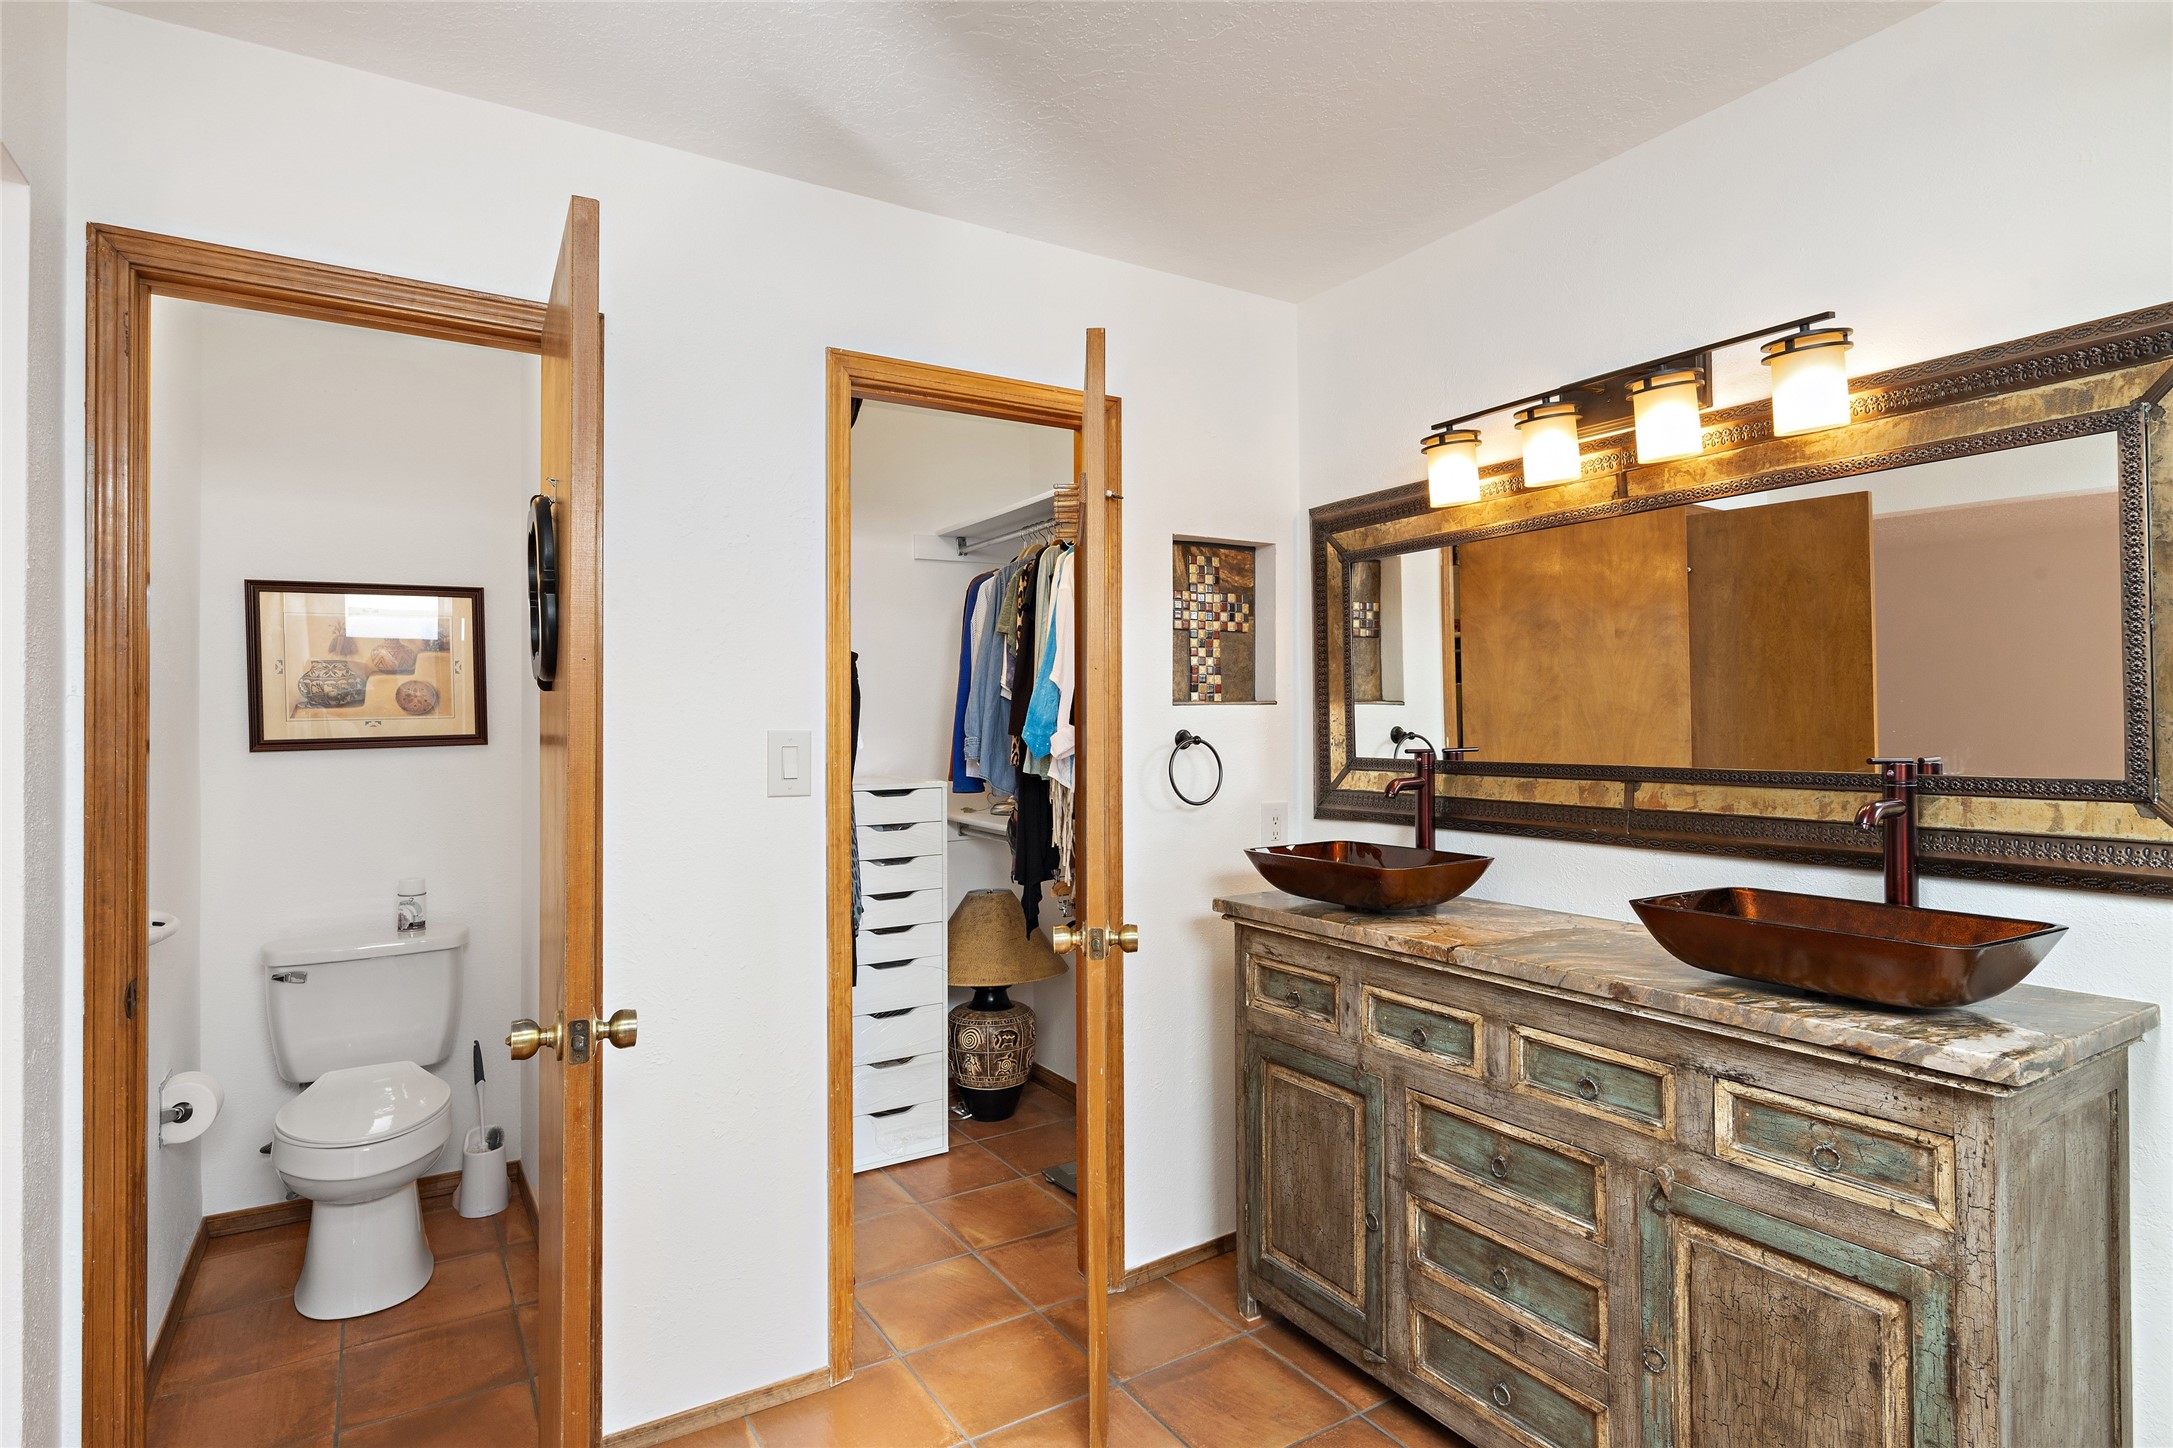 Large open primary bathroom with private water closet and the clothing closet